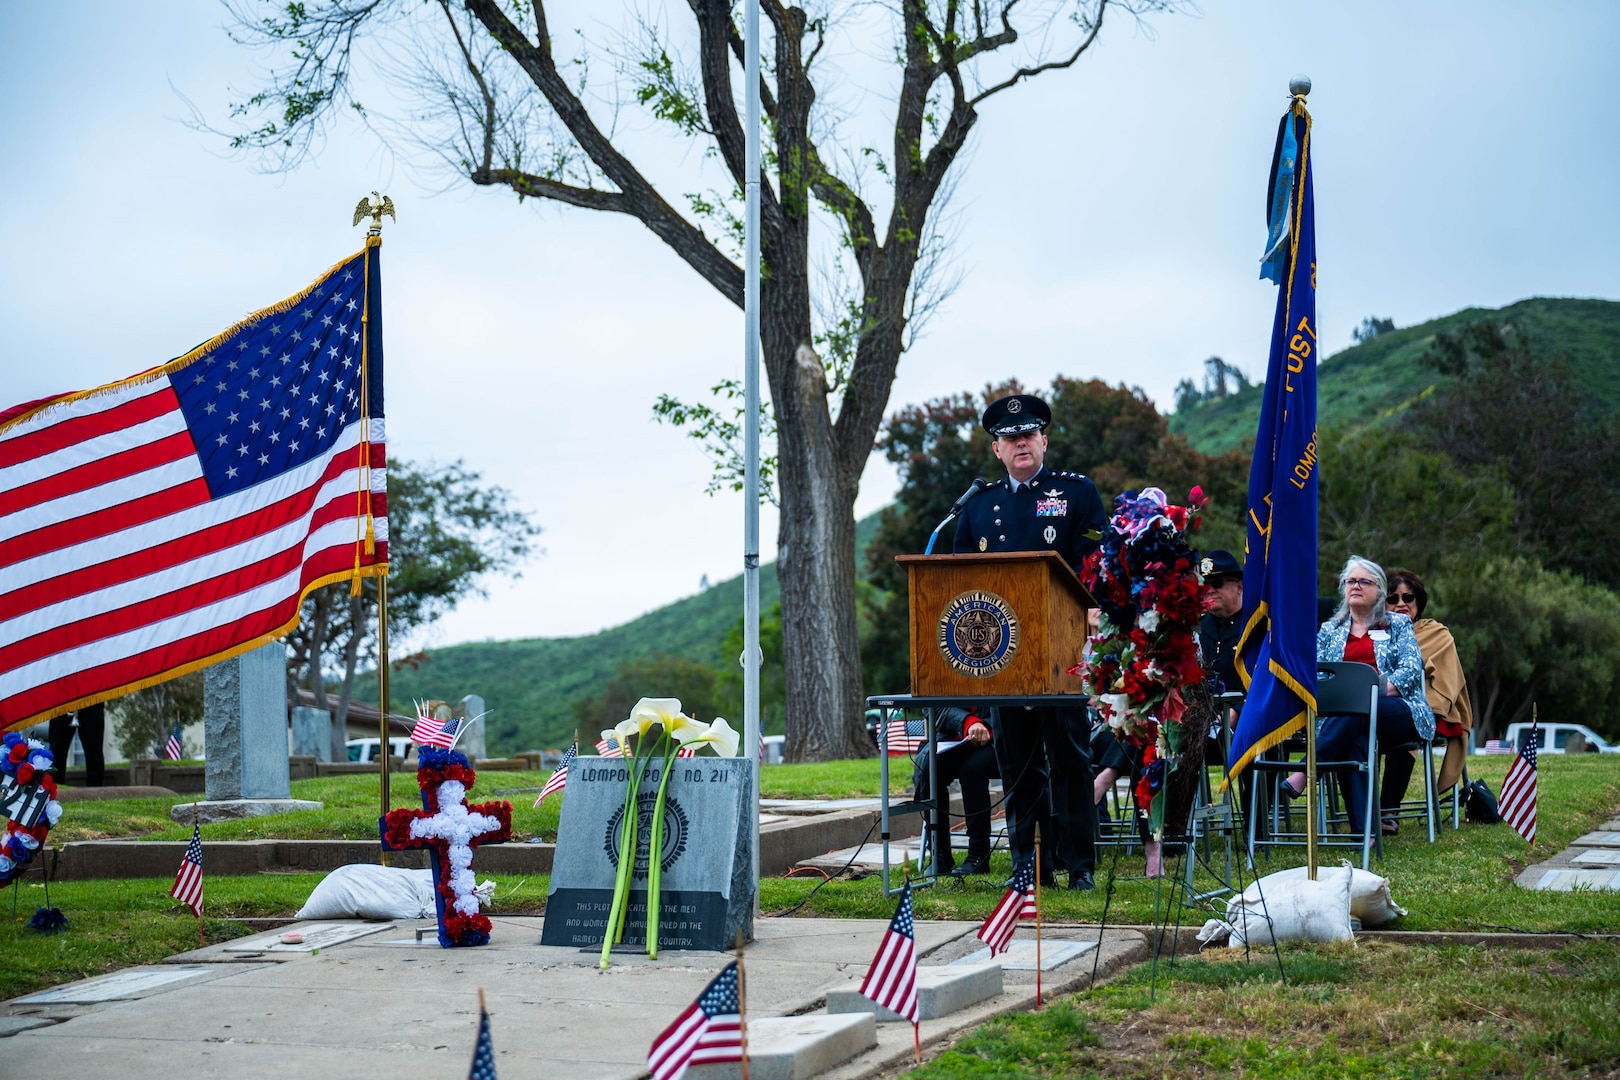 A general gives a speech at a podium in the middle of a cemetery surrounded by American flags.